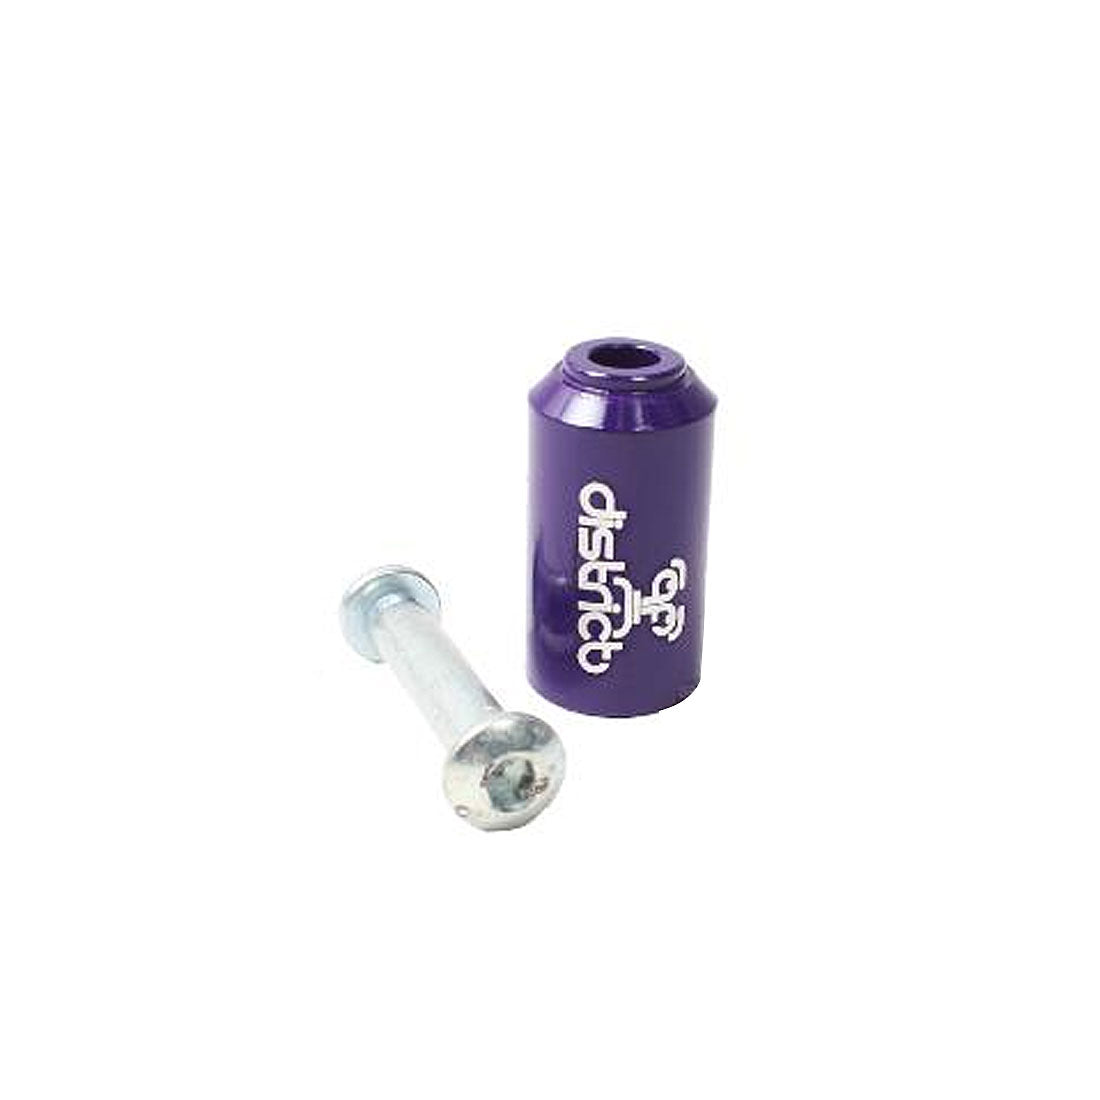 District ALU Pegs 2pk - Purple Scooter Hardware and Parts